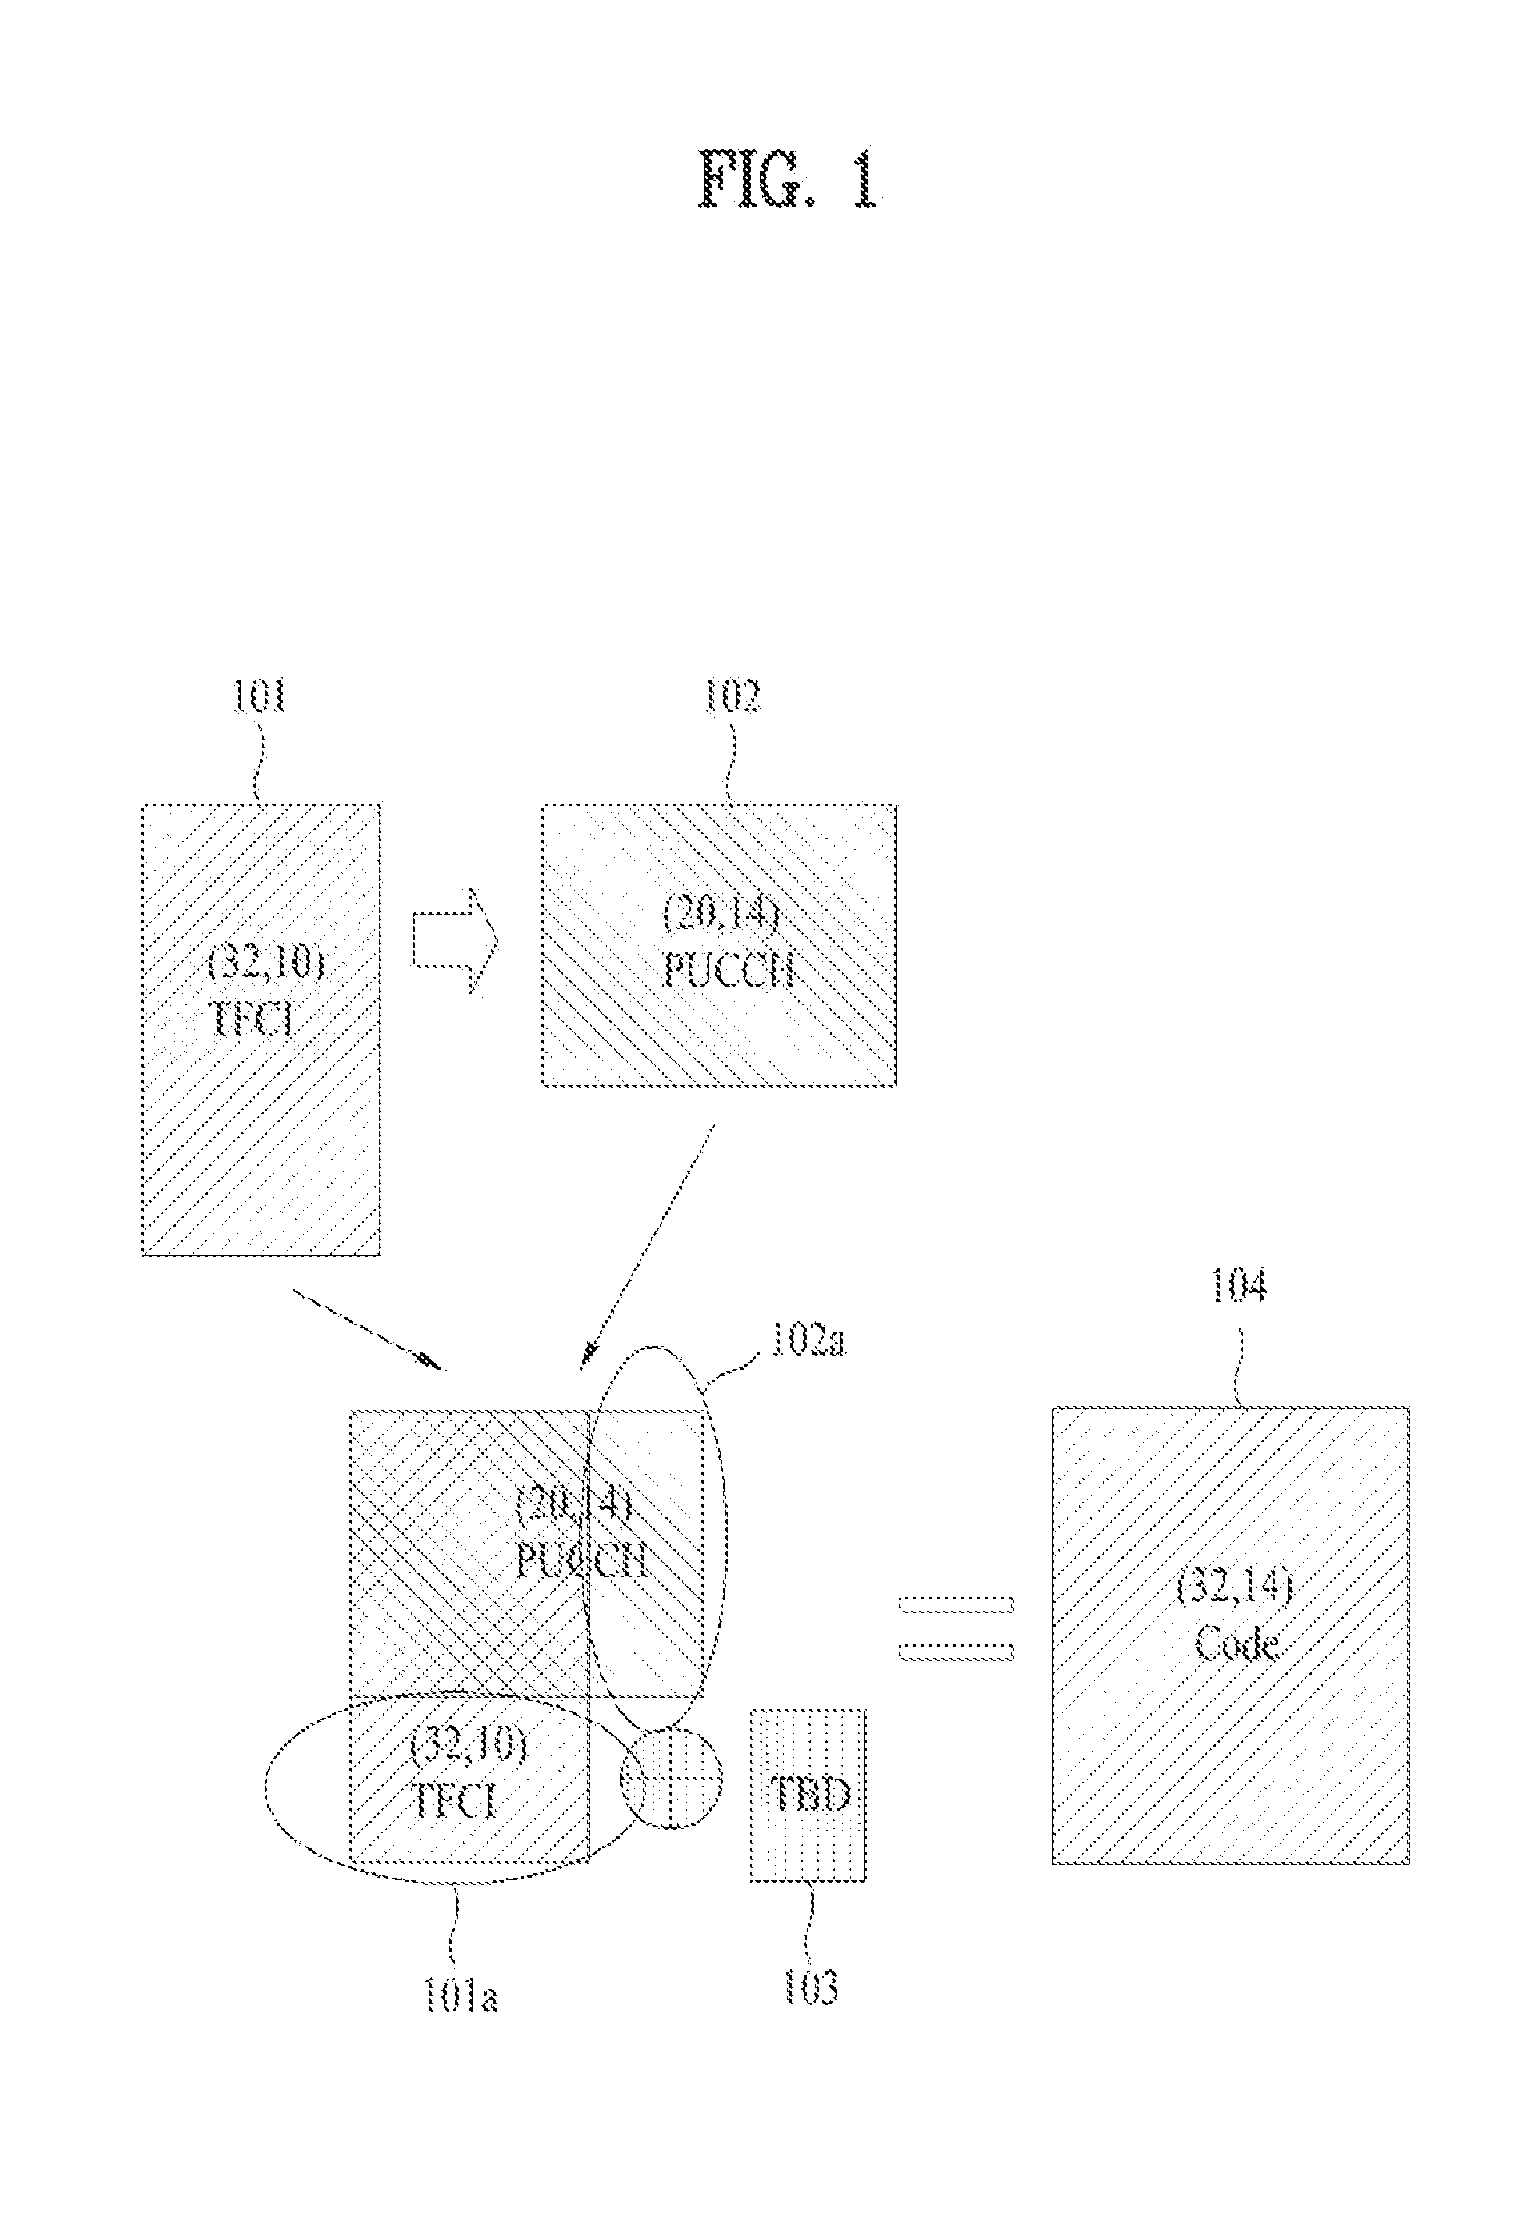 Channel coding method of variable length information using block code